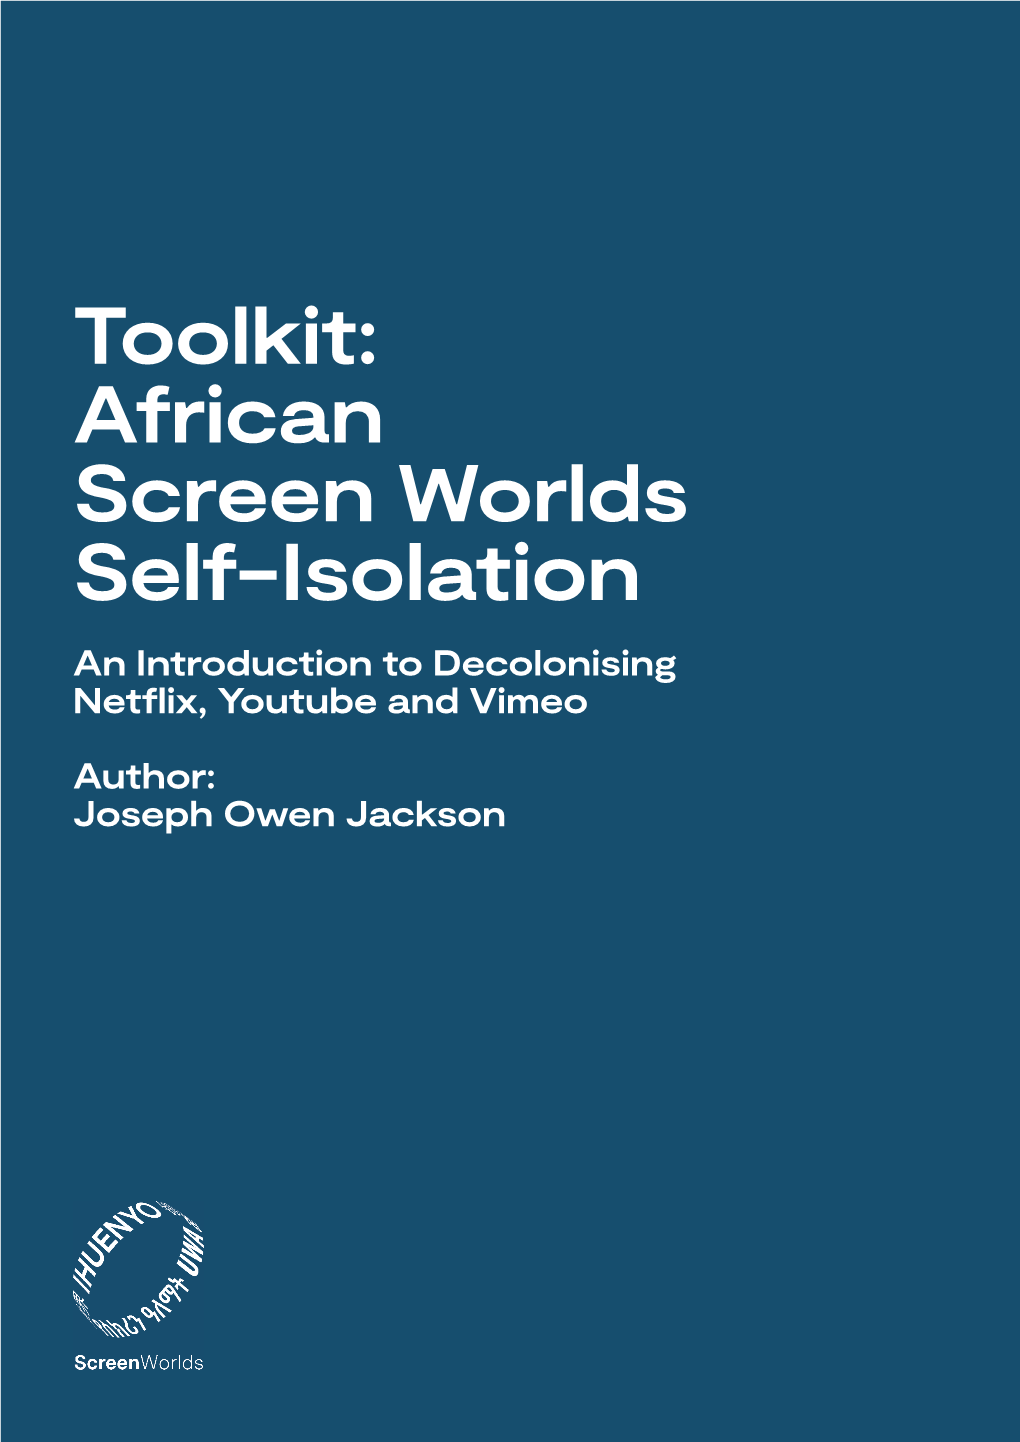 Toolkit: African Screen Worlds Self-Isolation an Introduction to Decolonising Netflix, Youtube and Vimeo